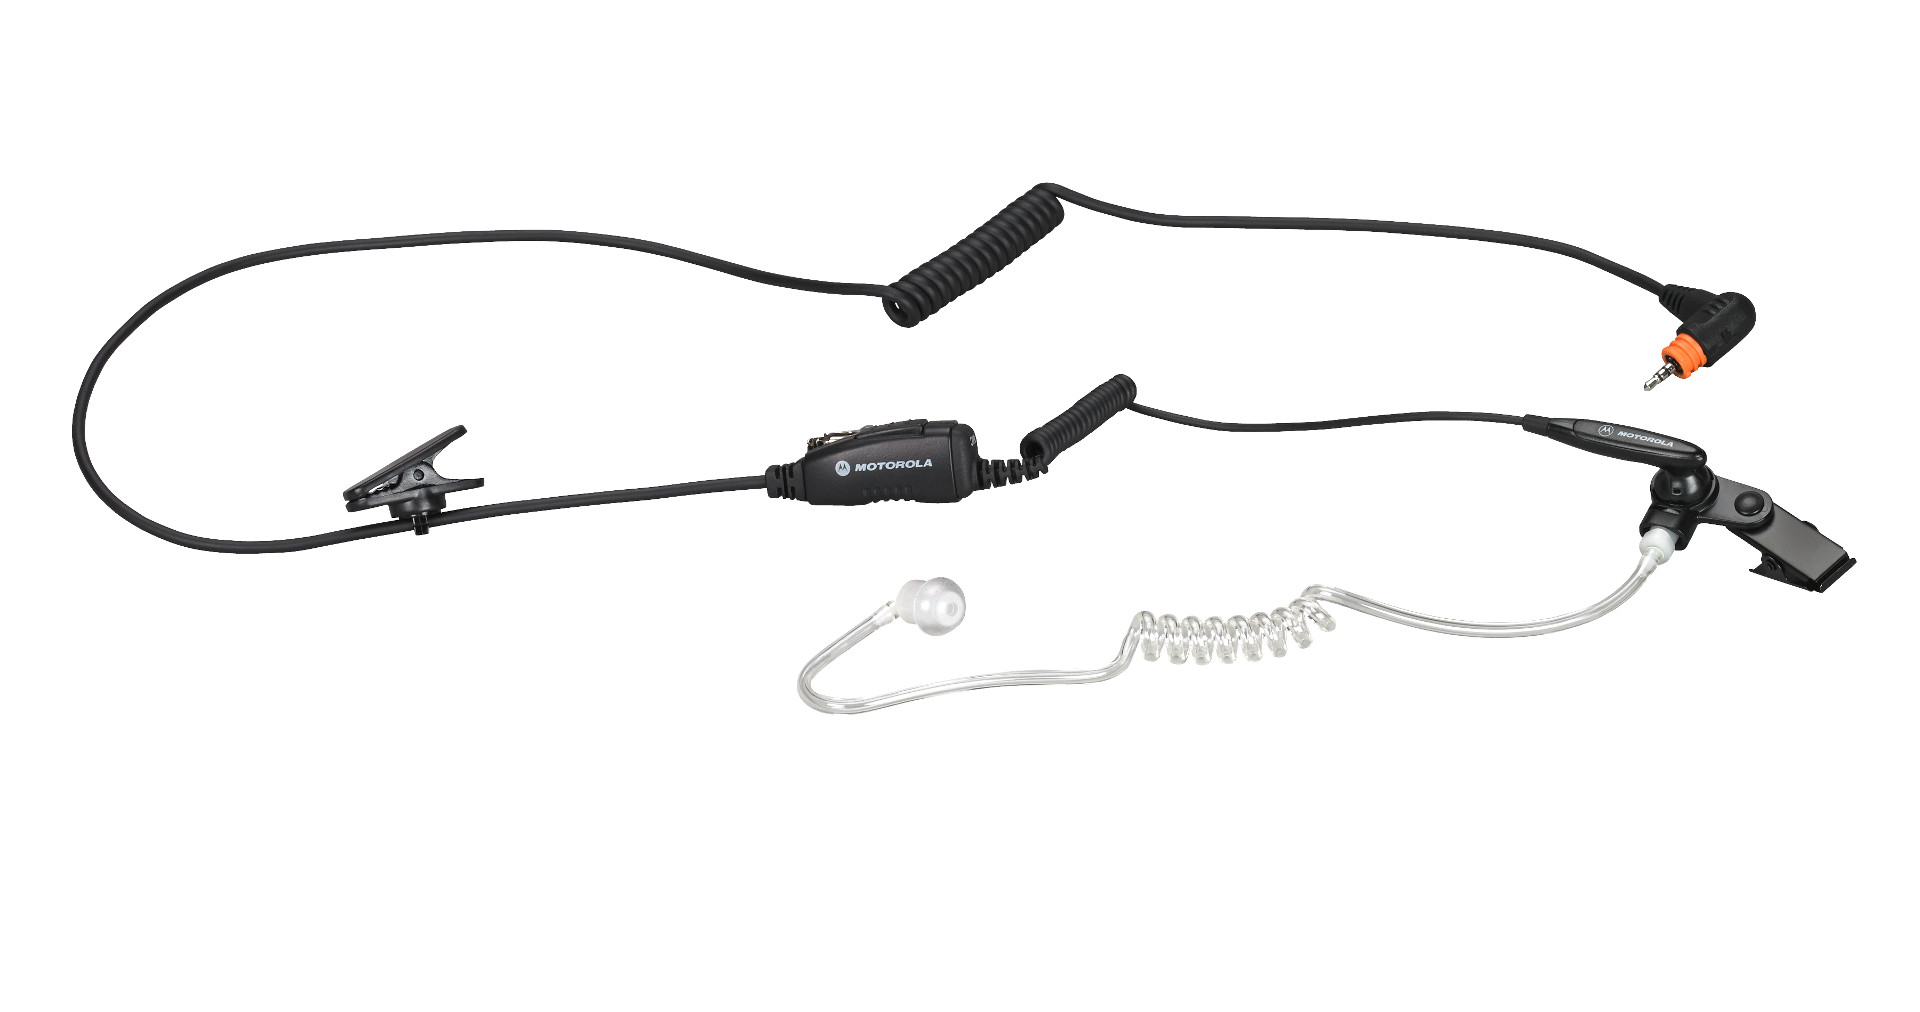 Motorola Surveillance earpiece with Mic and PTT Combined (Black) PMLN7158A